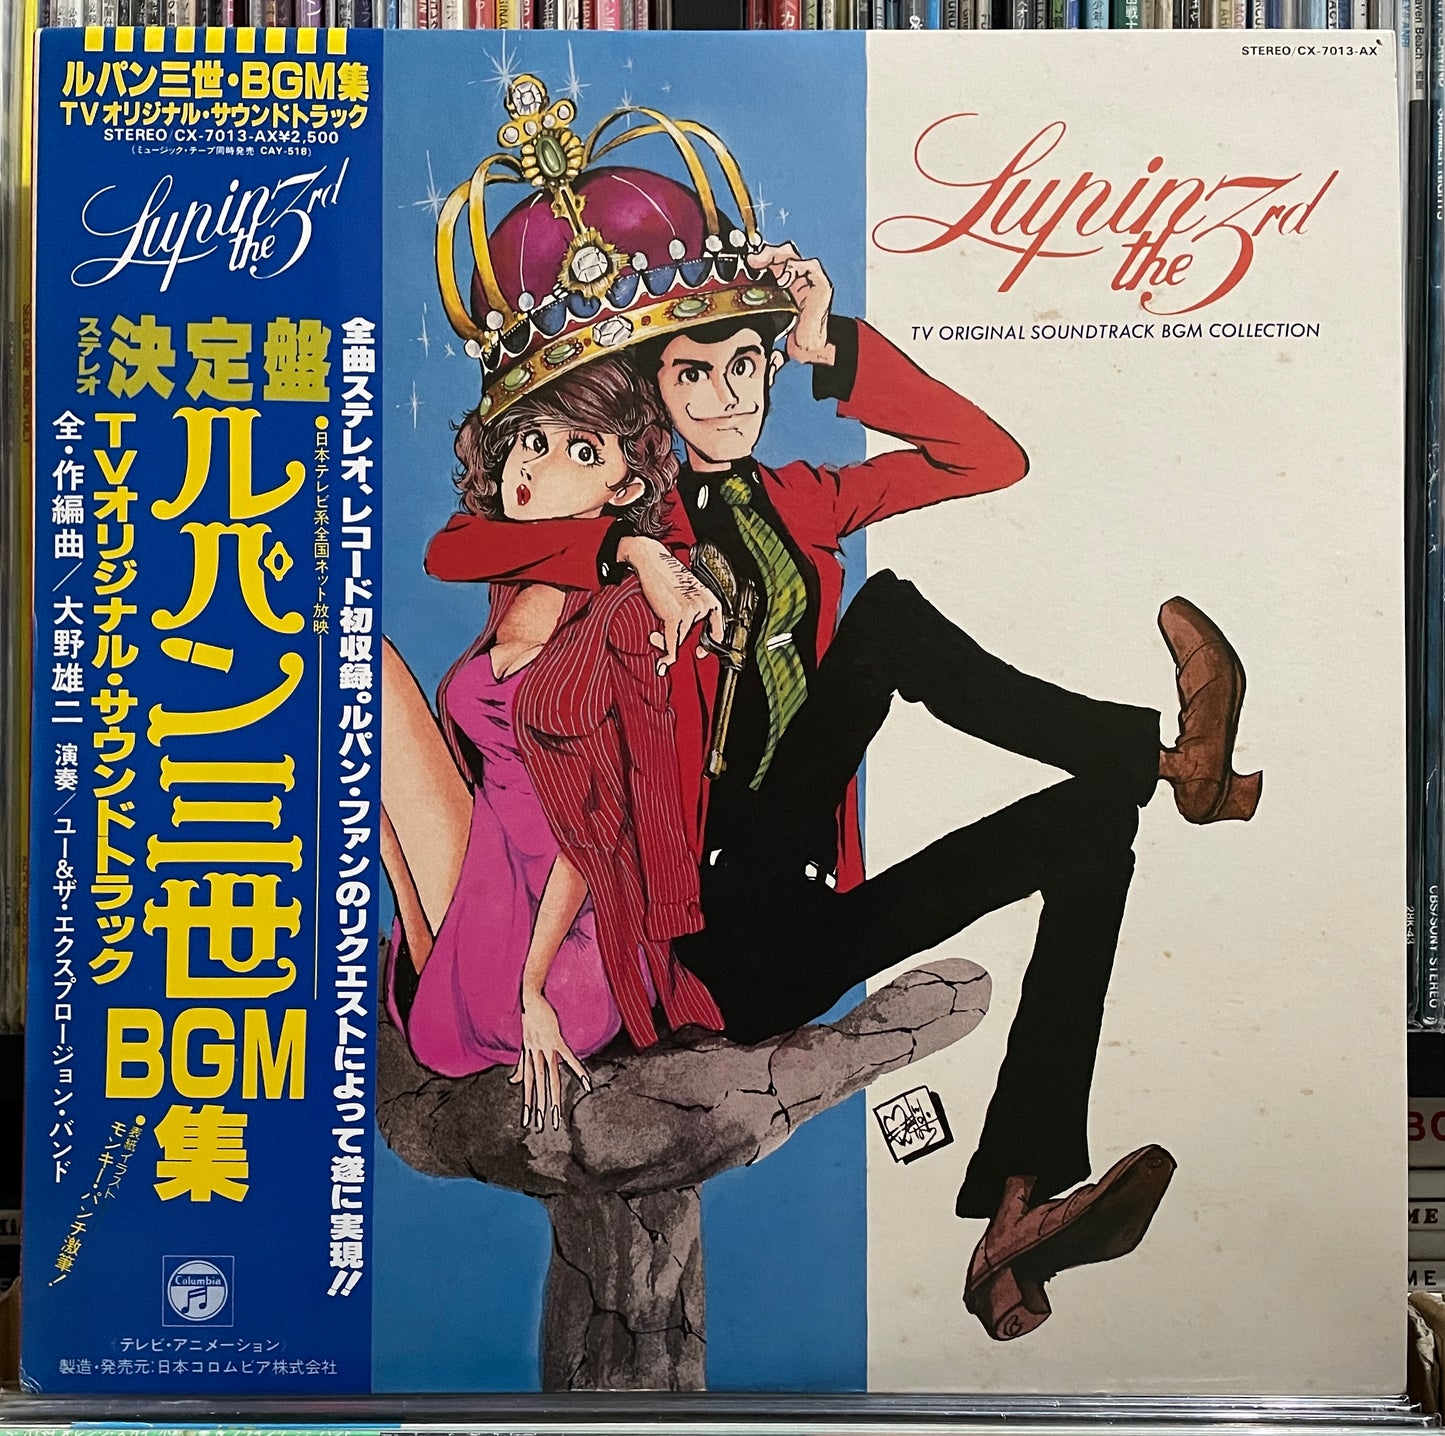 Yuji Ohno (You & The Explosion Band) Lupin The 3rd BGM (1980).